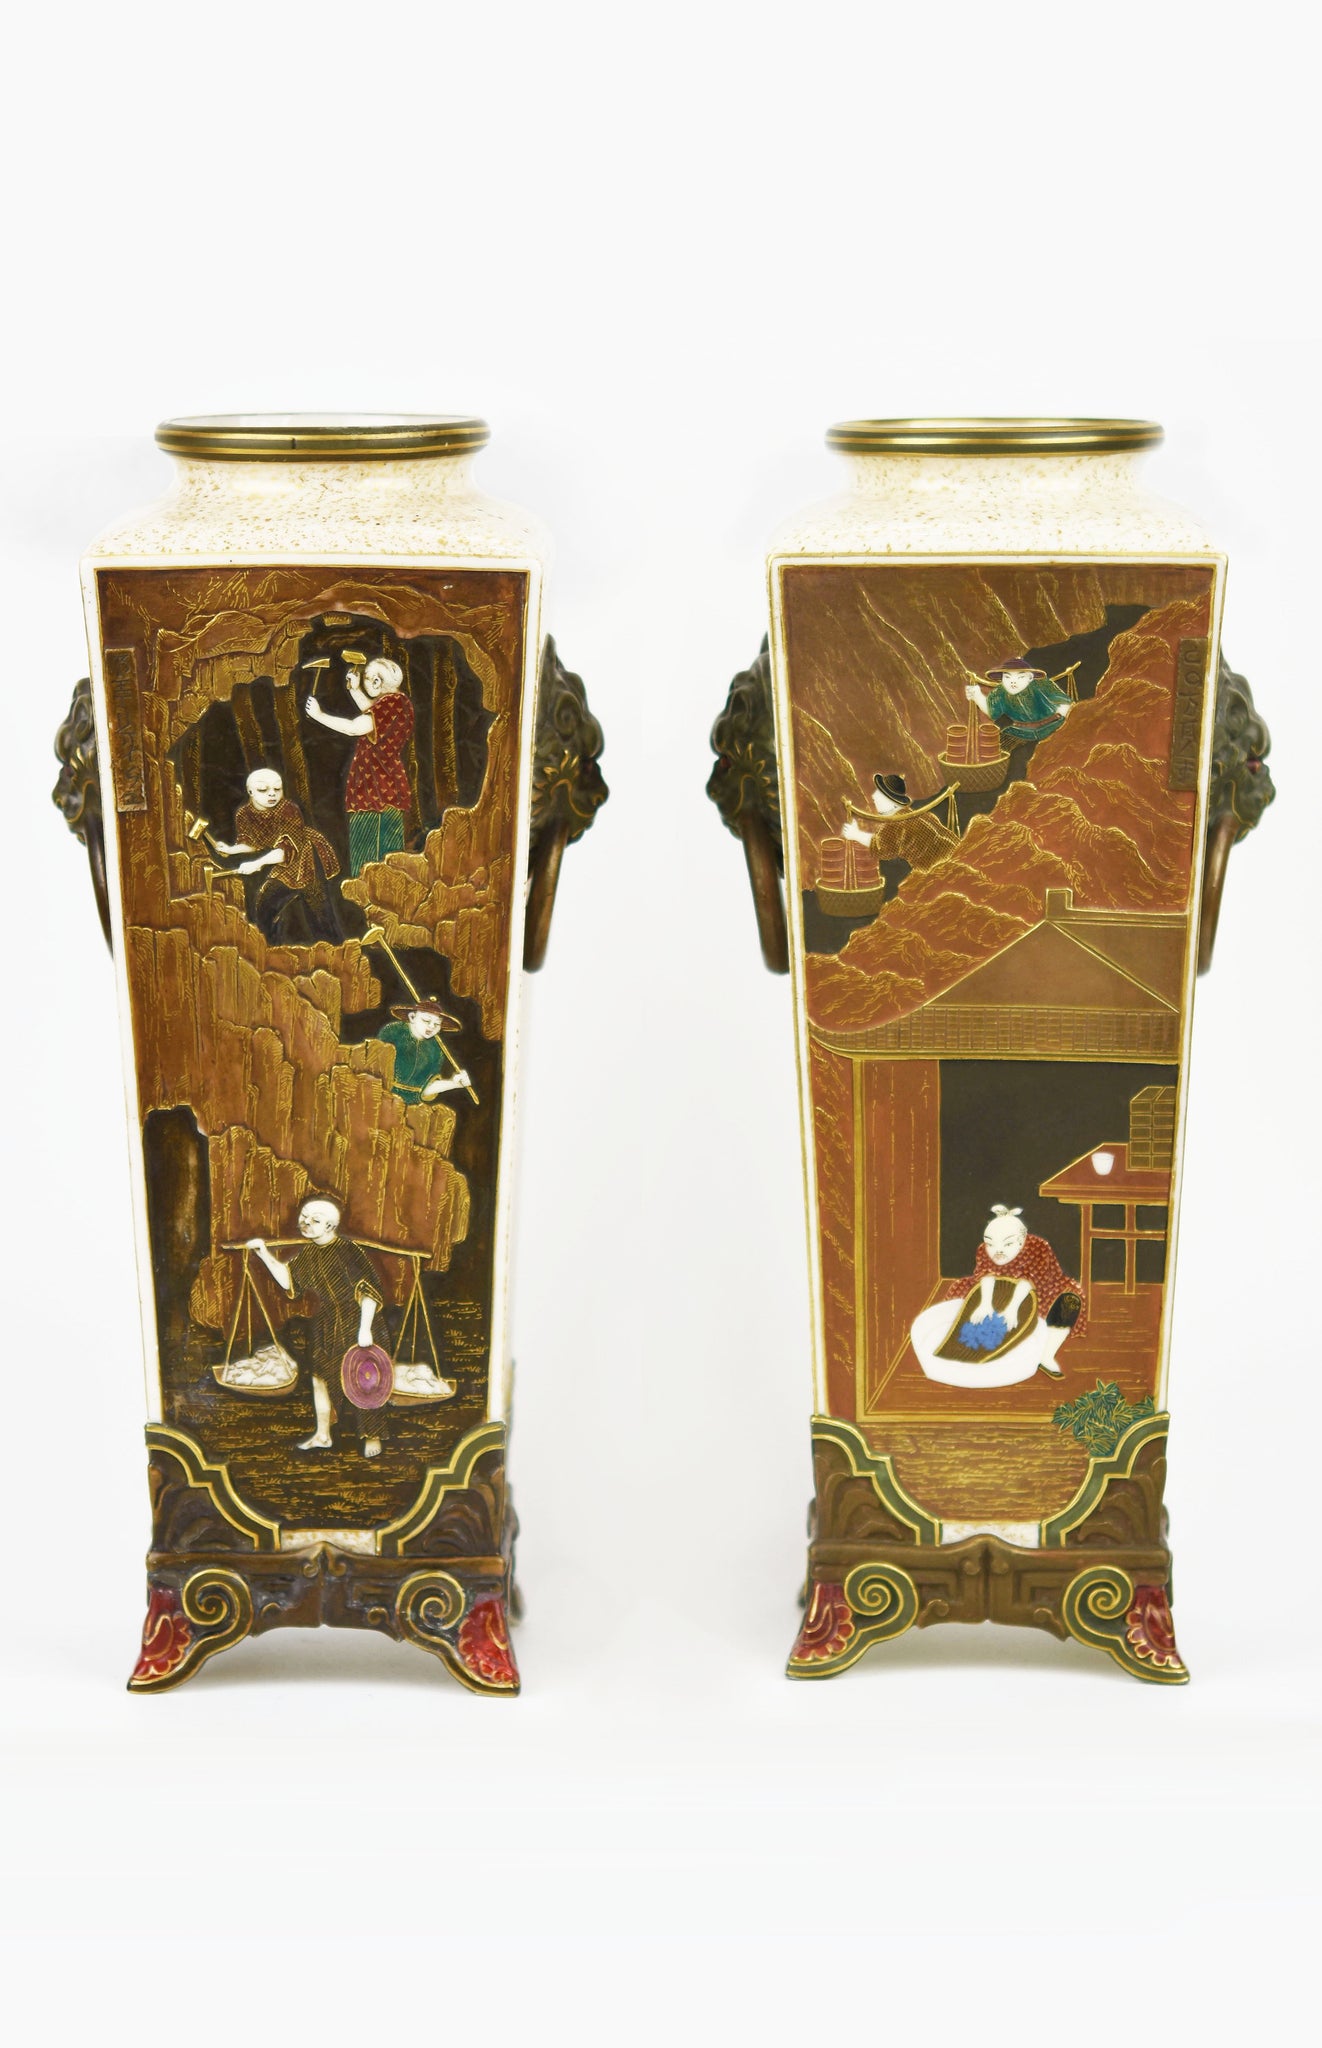 Pair of Royal Worcester Porcelain Aesthetic Movement Vases c.1875